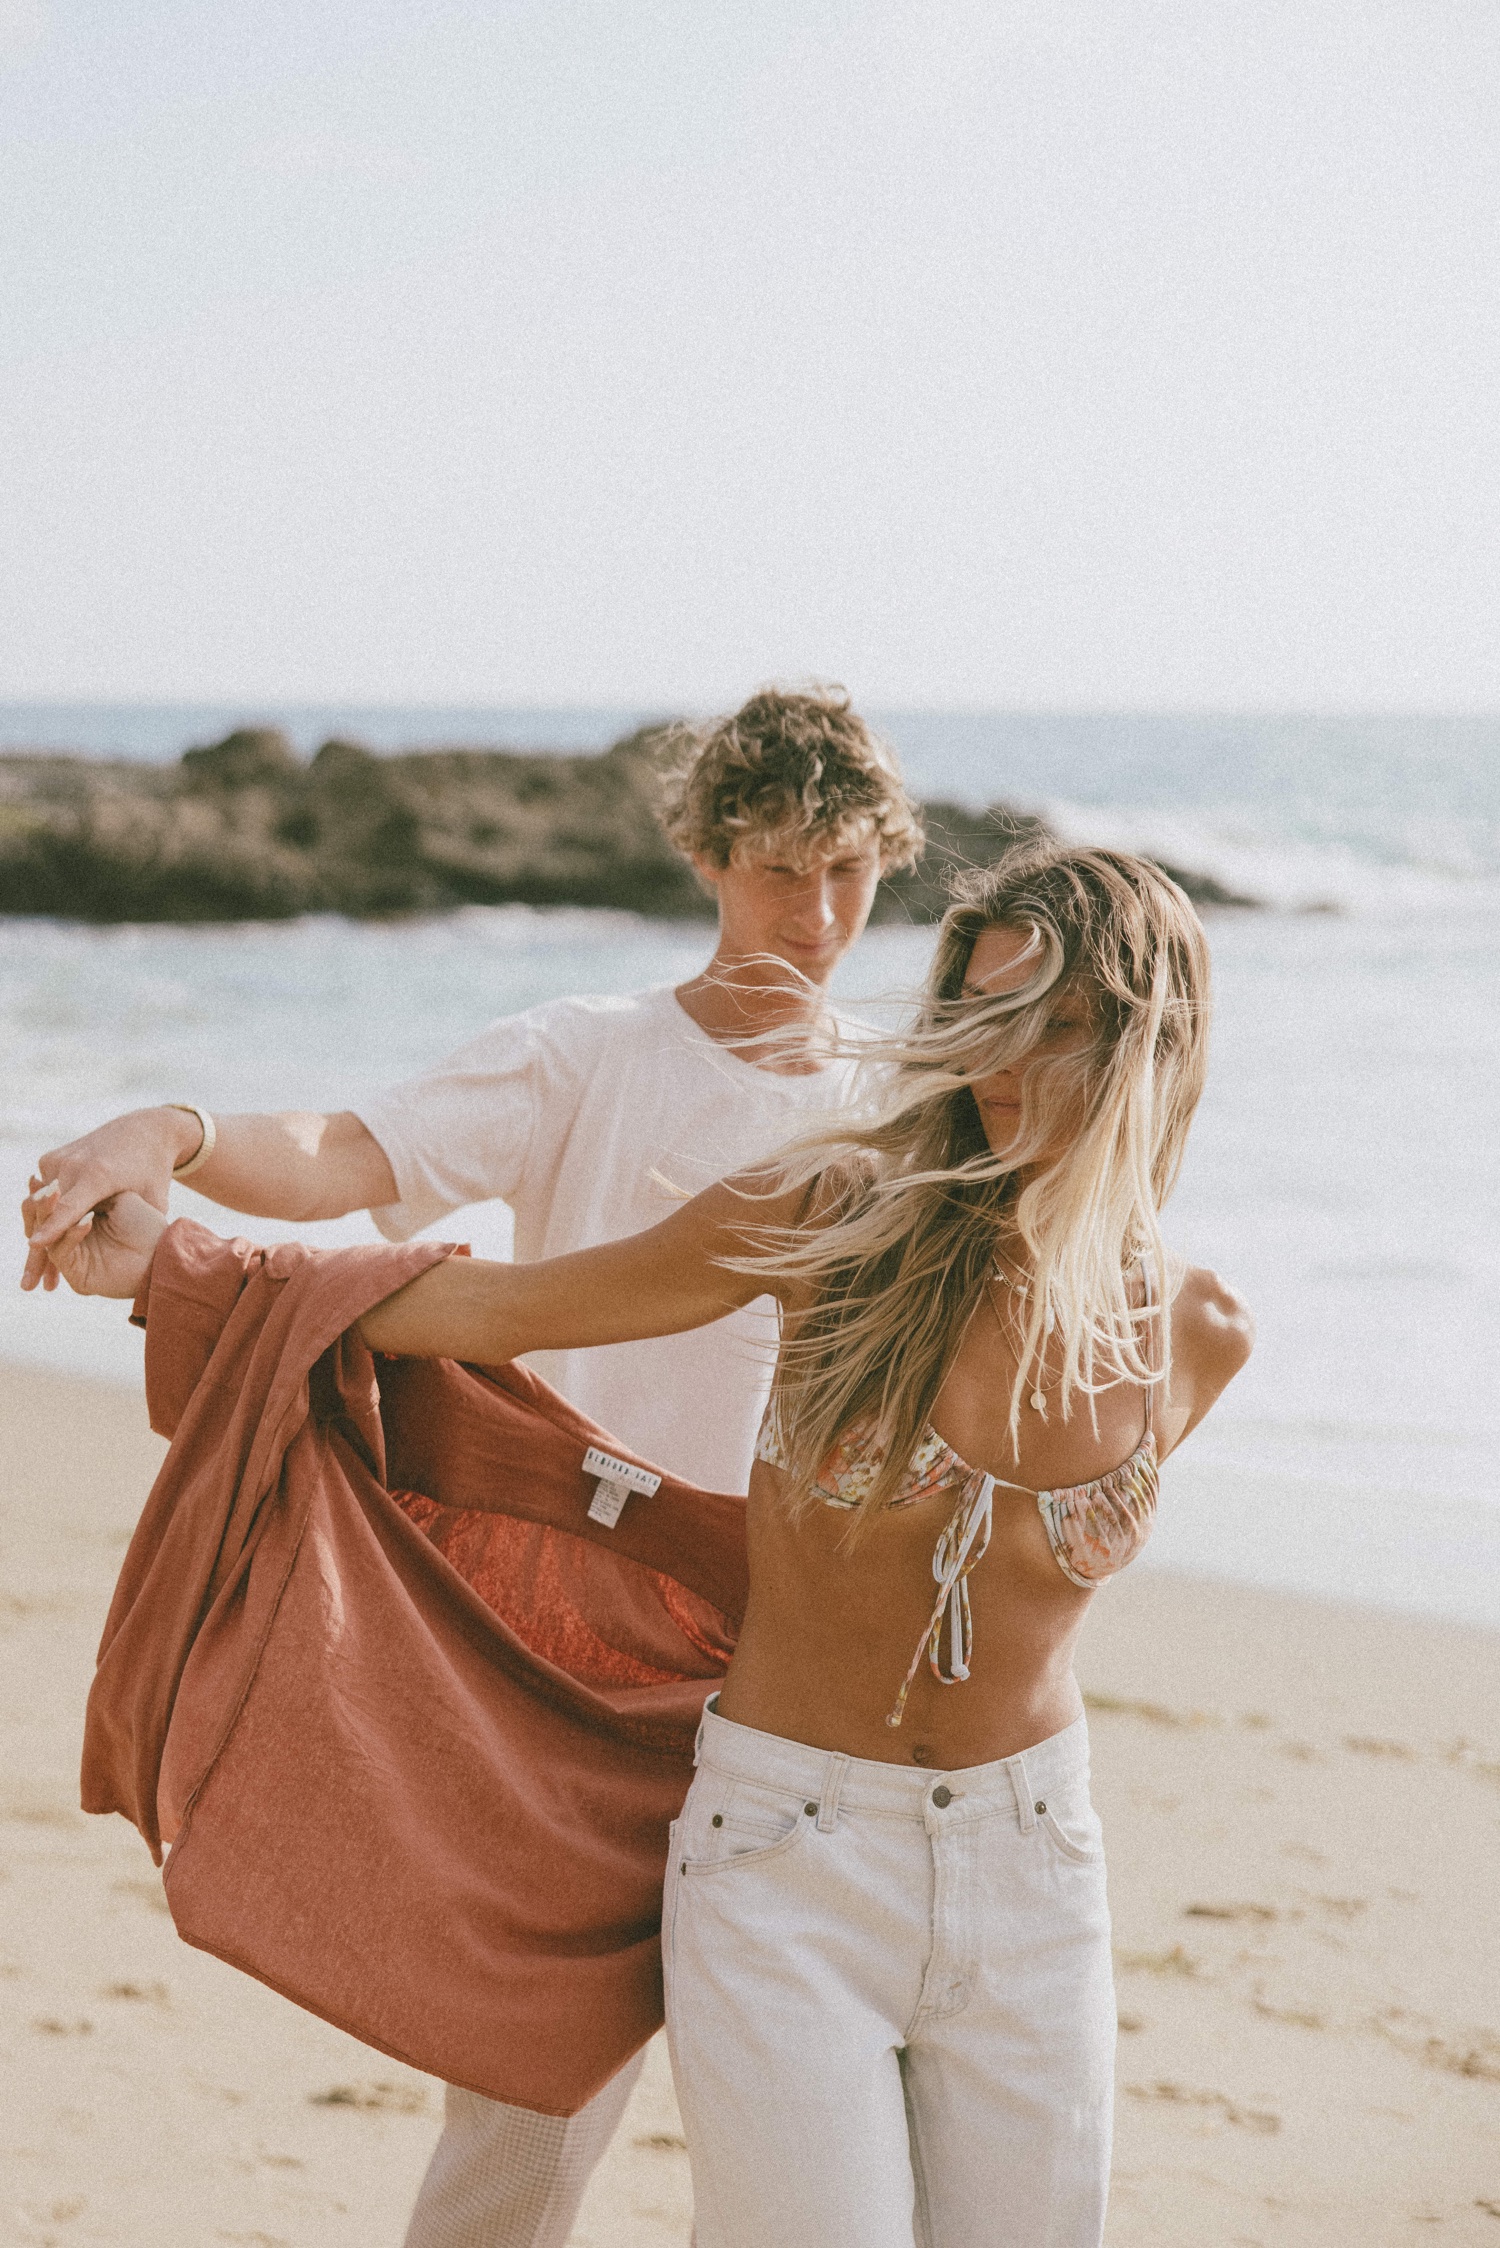 Young couple embracing and posing on the beach - Stock Photo - Masterfile -  Premium Royalty-Free, Code: 6109-06781671